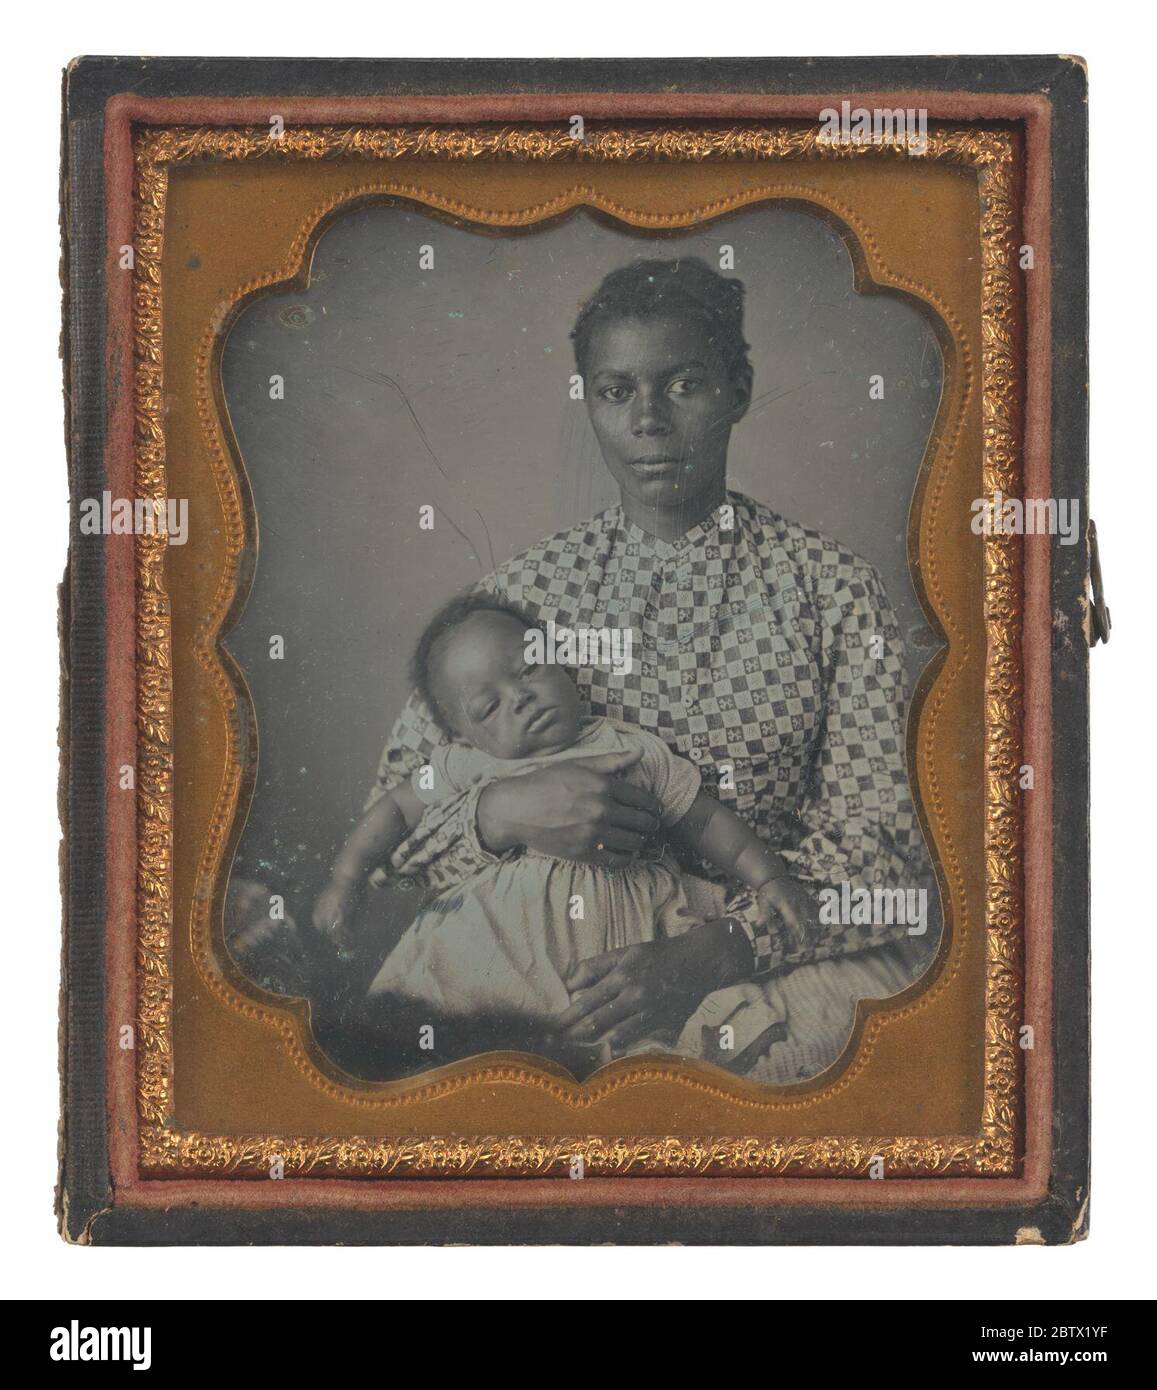 Daguerreotype of a woman with a child on her lap. Daguerreotype of a woman wearing a floral checked patterned blouse. The woman looks straight ahead at the camera and holds a baby on her lap. The baby wears a dress with a light colored dot pattern. The portrait is in front of a plain grey background. Stock Photo